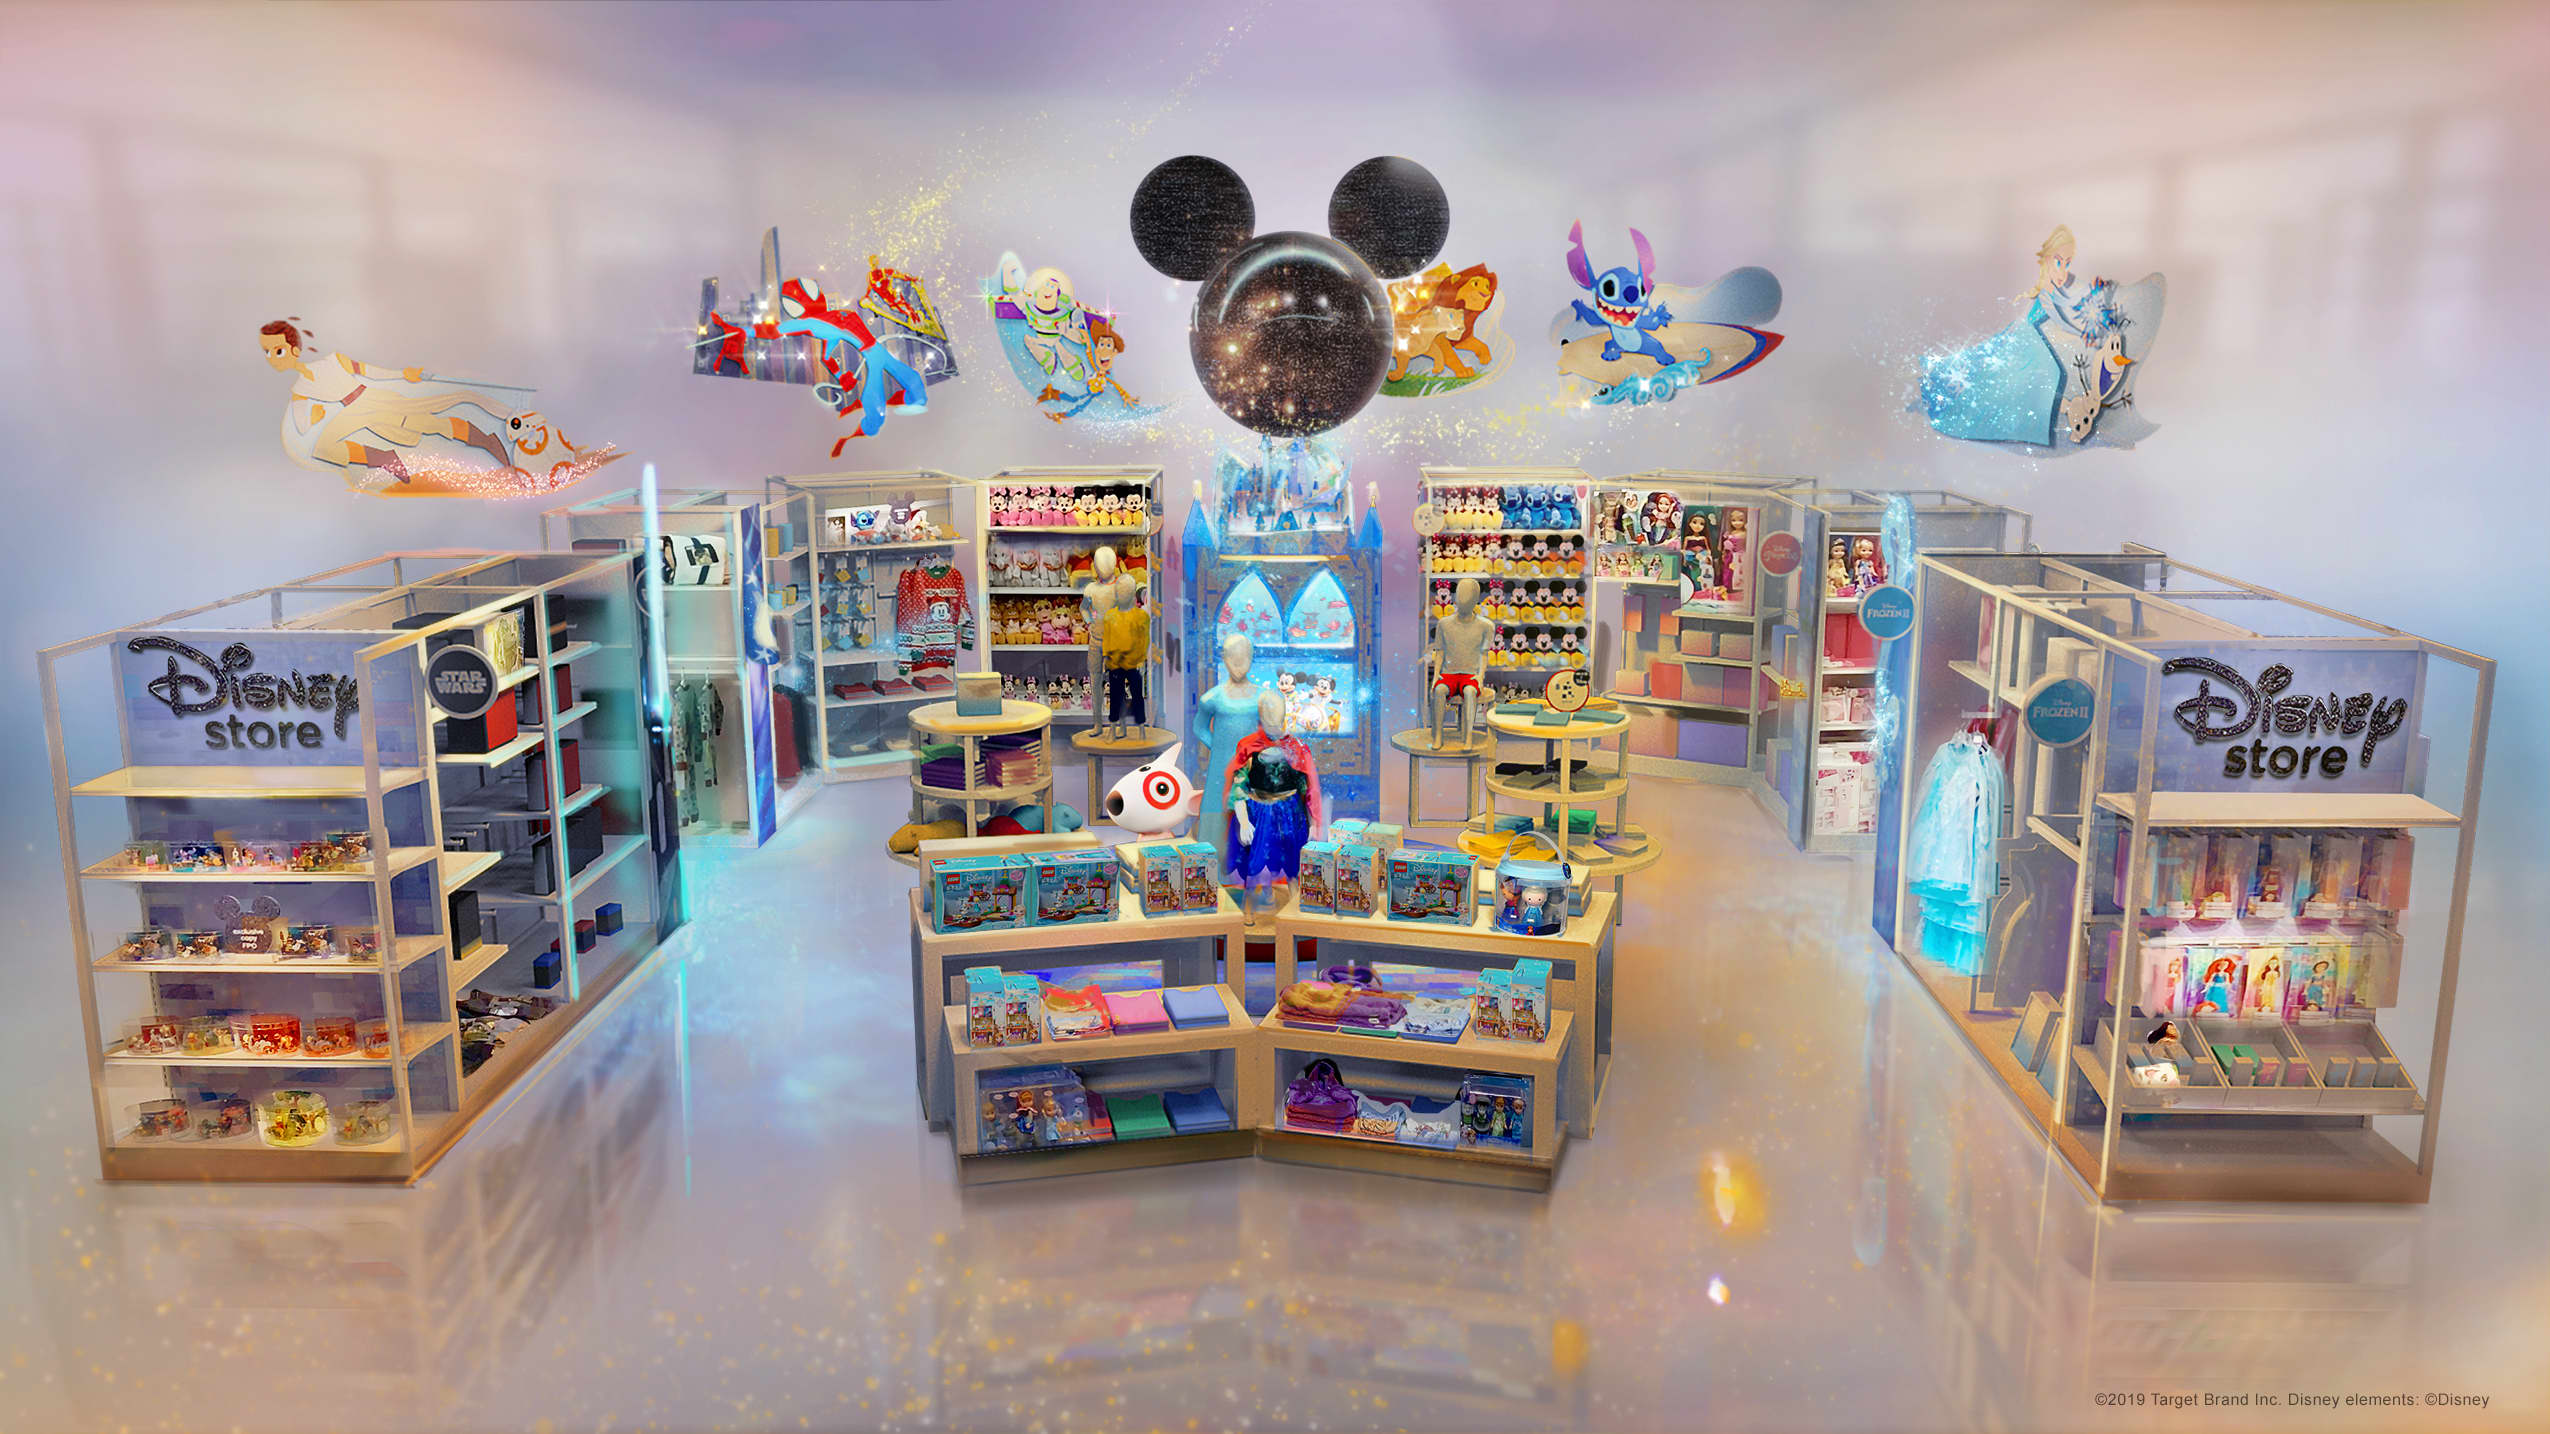 Disney and Target are teaming up to open stores with each